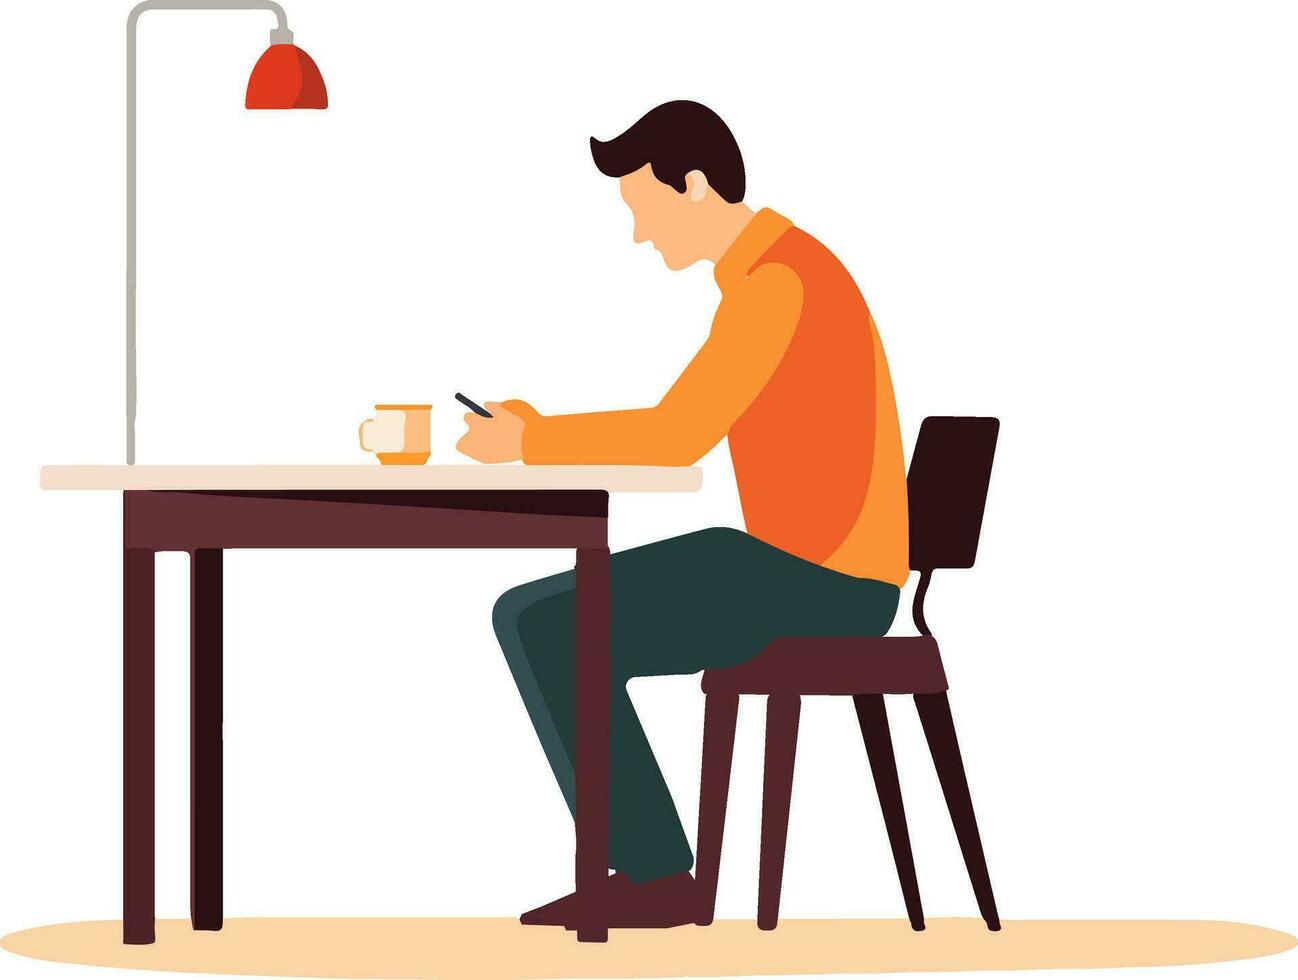 Connected and engaged - Illustrate a man sitting at a table, engrossed in his phone. Capture modern communication and technology with this vector illustration.